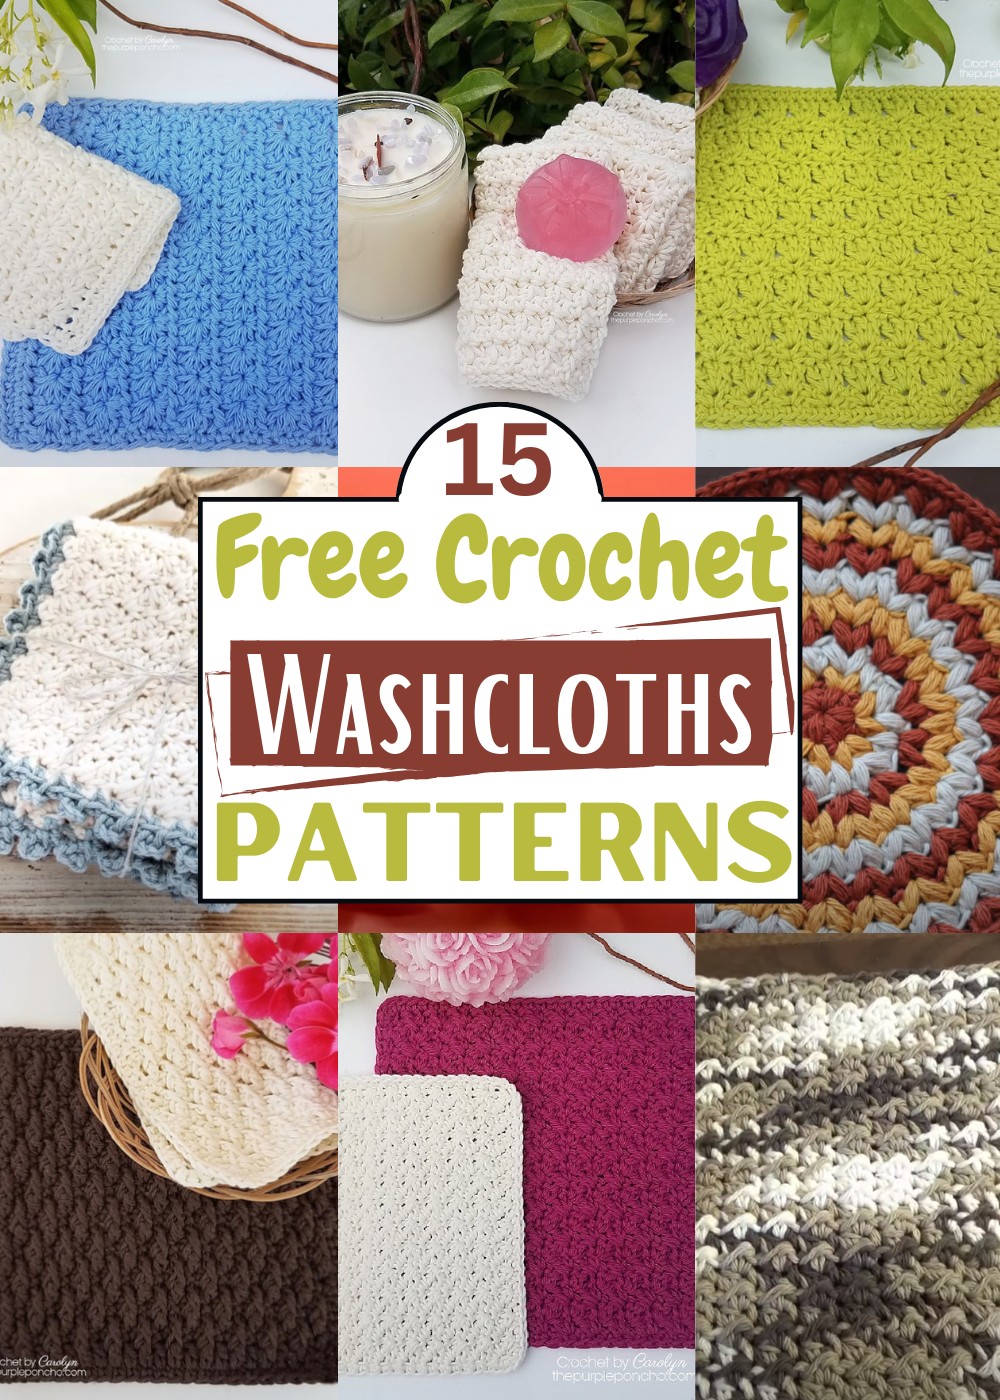 15 Free Crochet Washcloths Patterns For All Skill Levels!